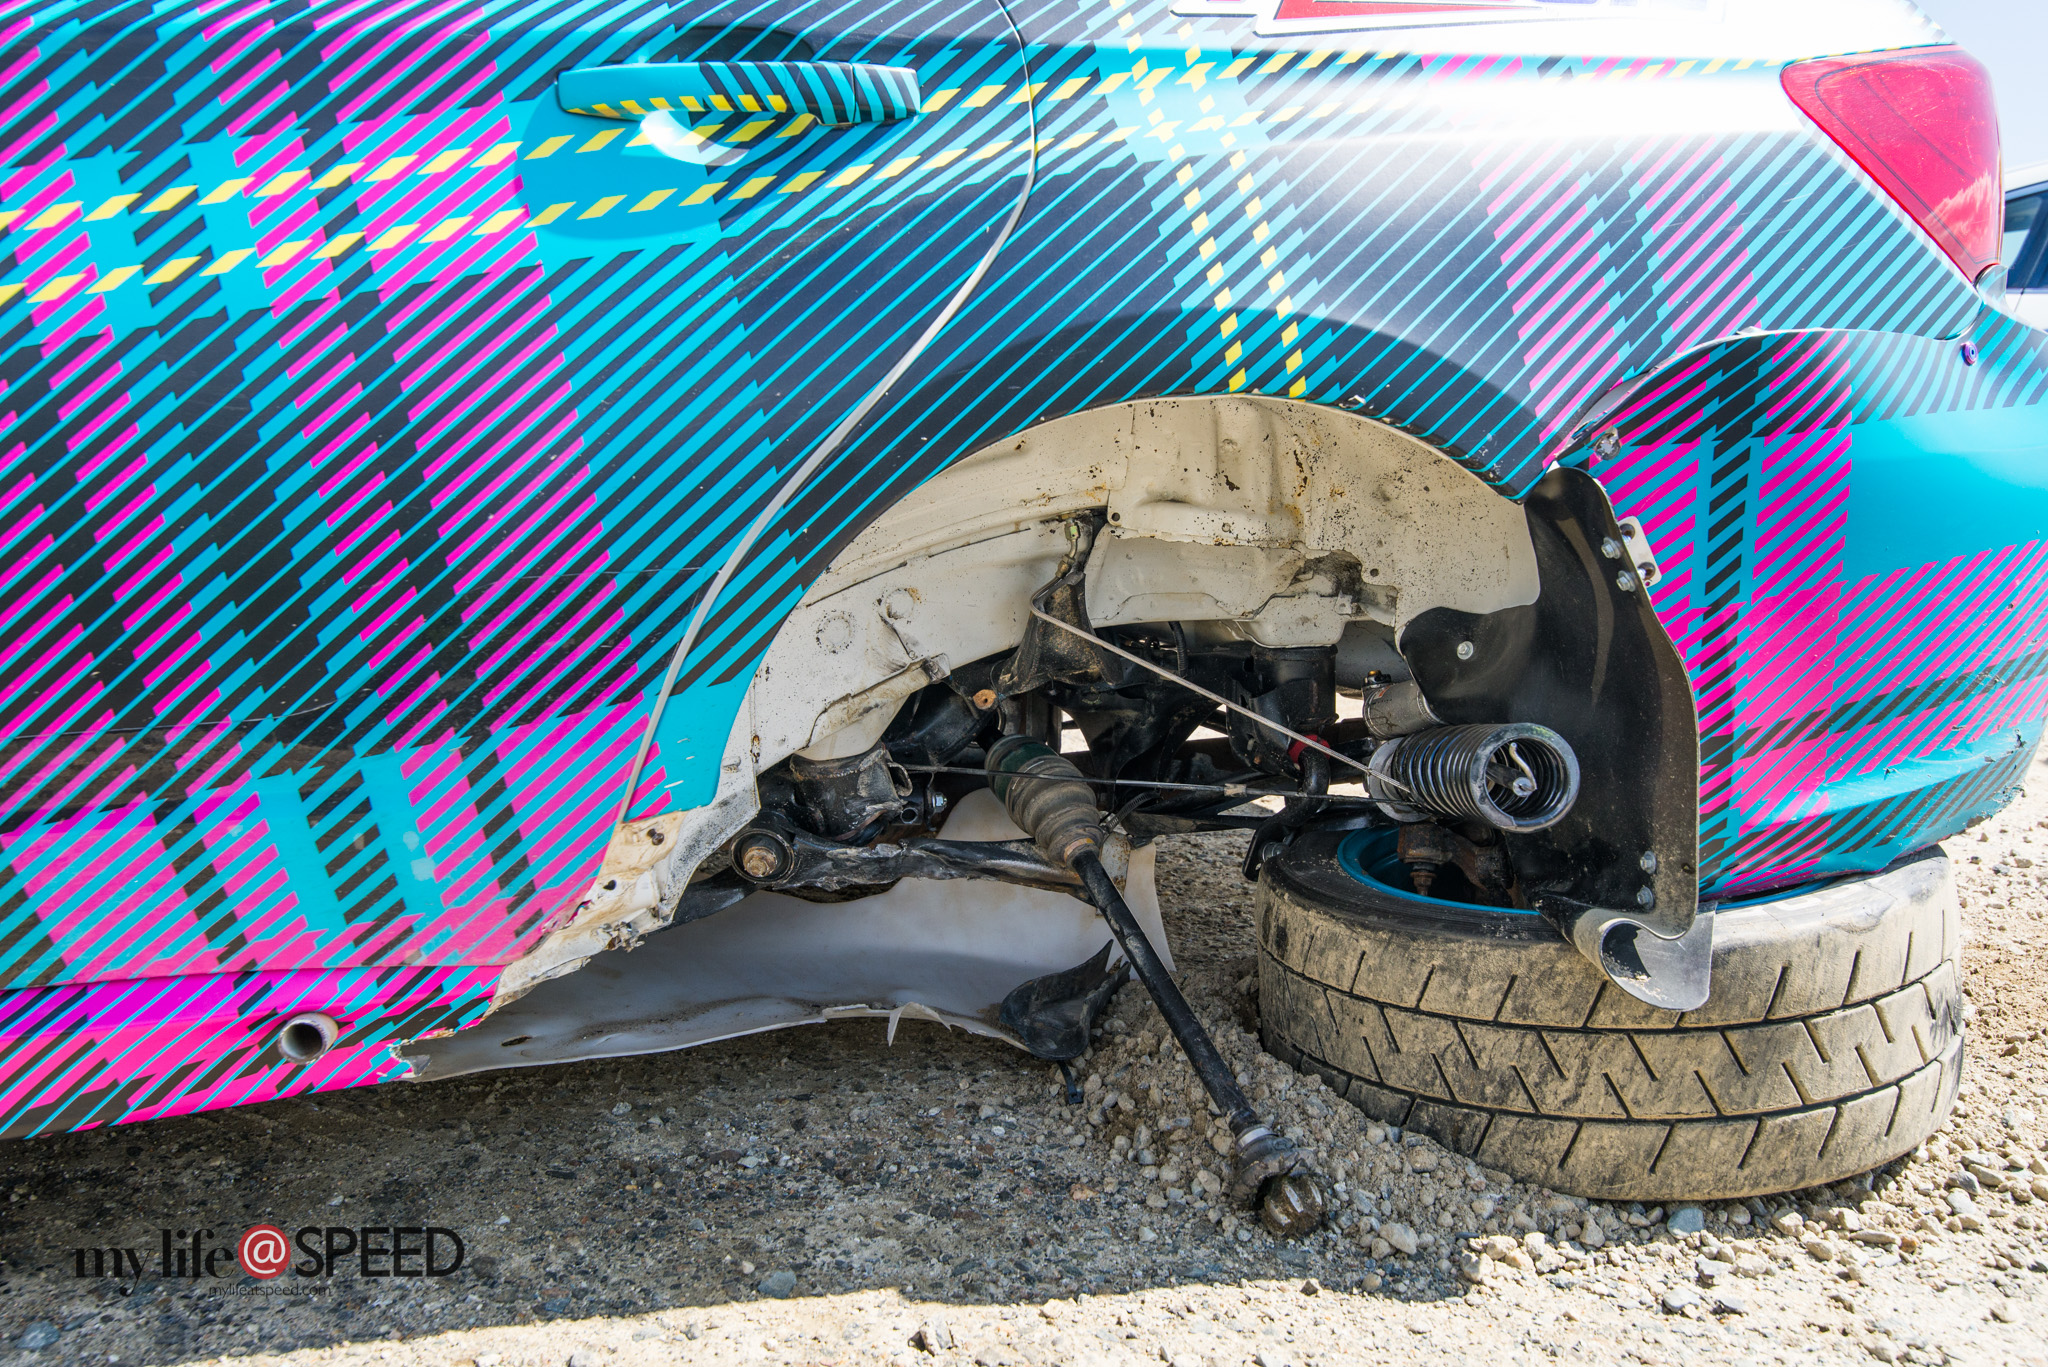 202 Nick Roberts 2014 Subaru STI with a ripped off left rear wheel after swinging it too wide at Cragway Corner and hitting a boulder on Day 2 Practice. here's a closer look at the aftermath.